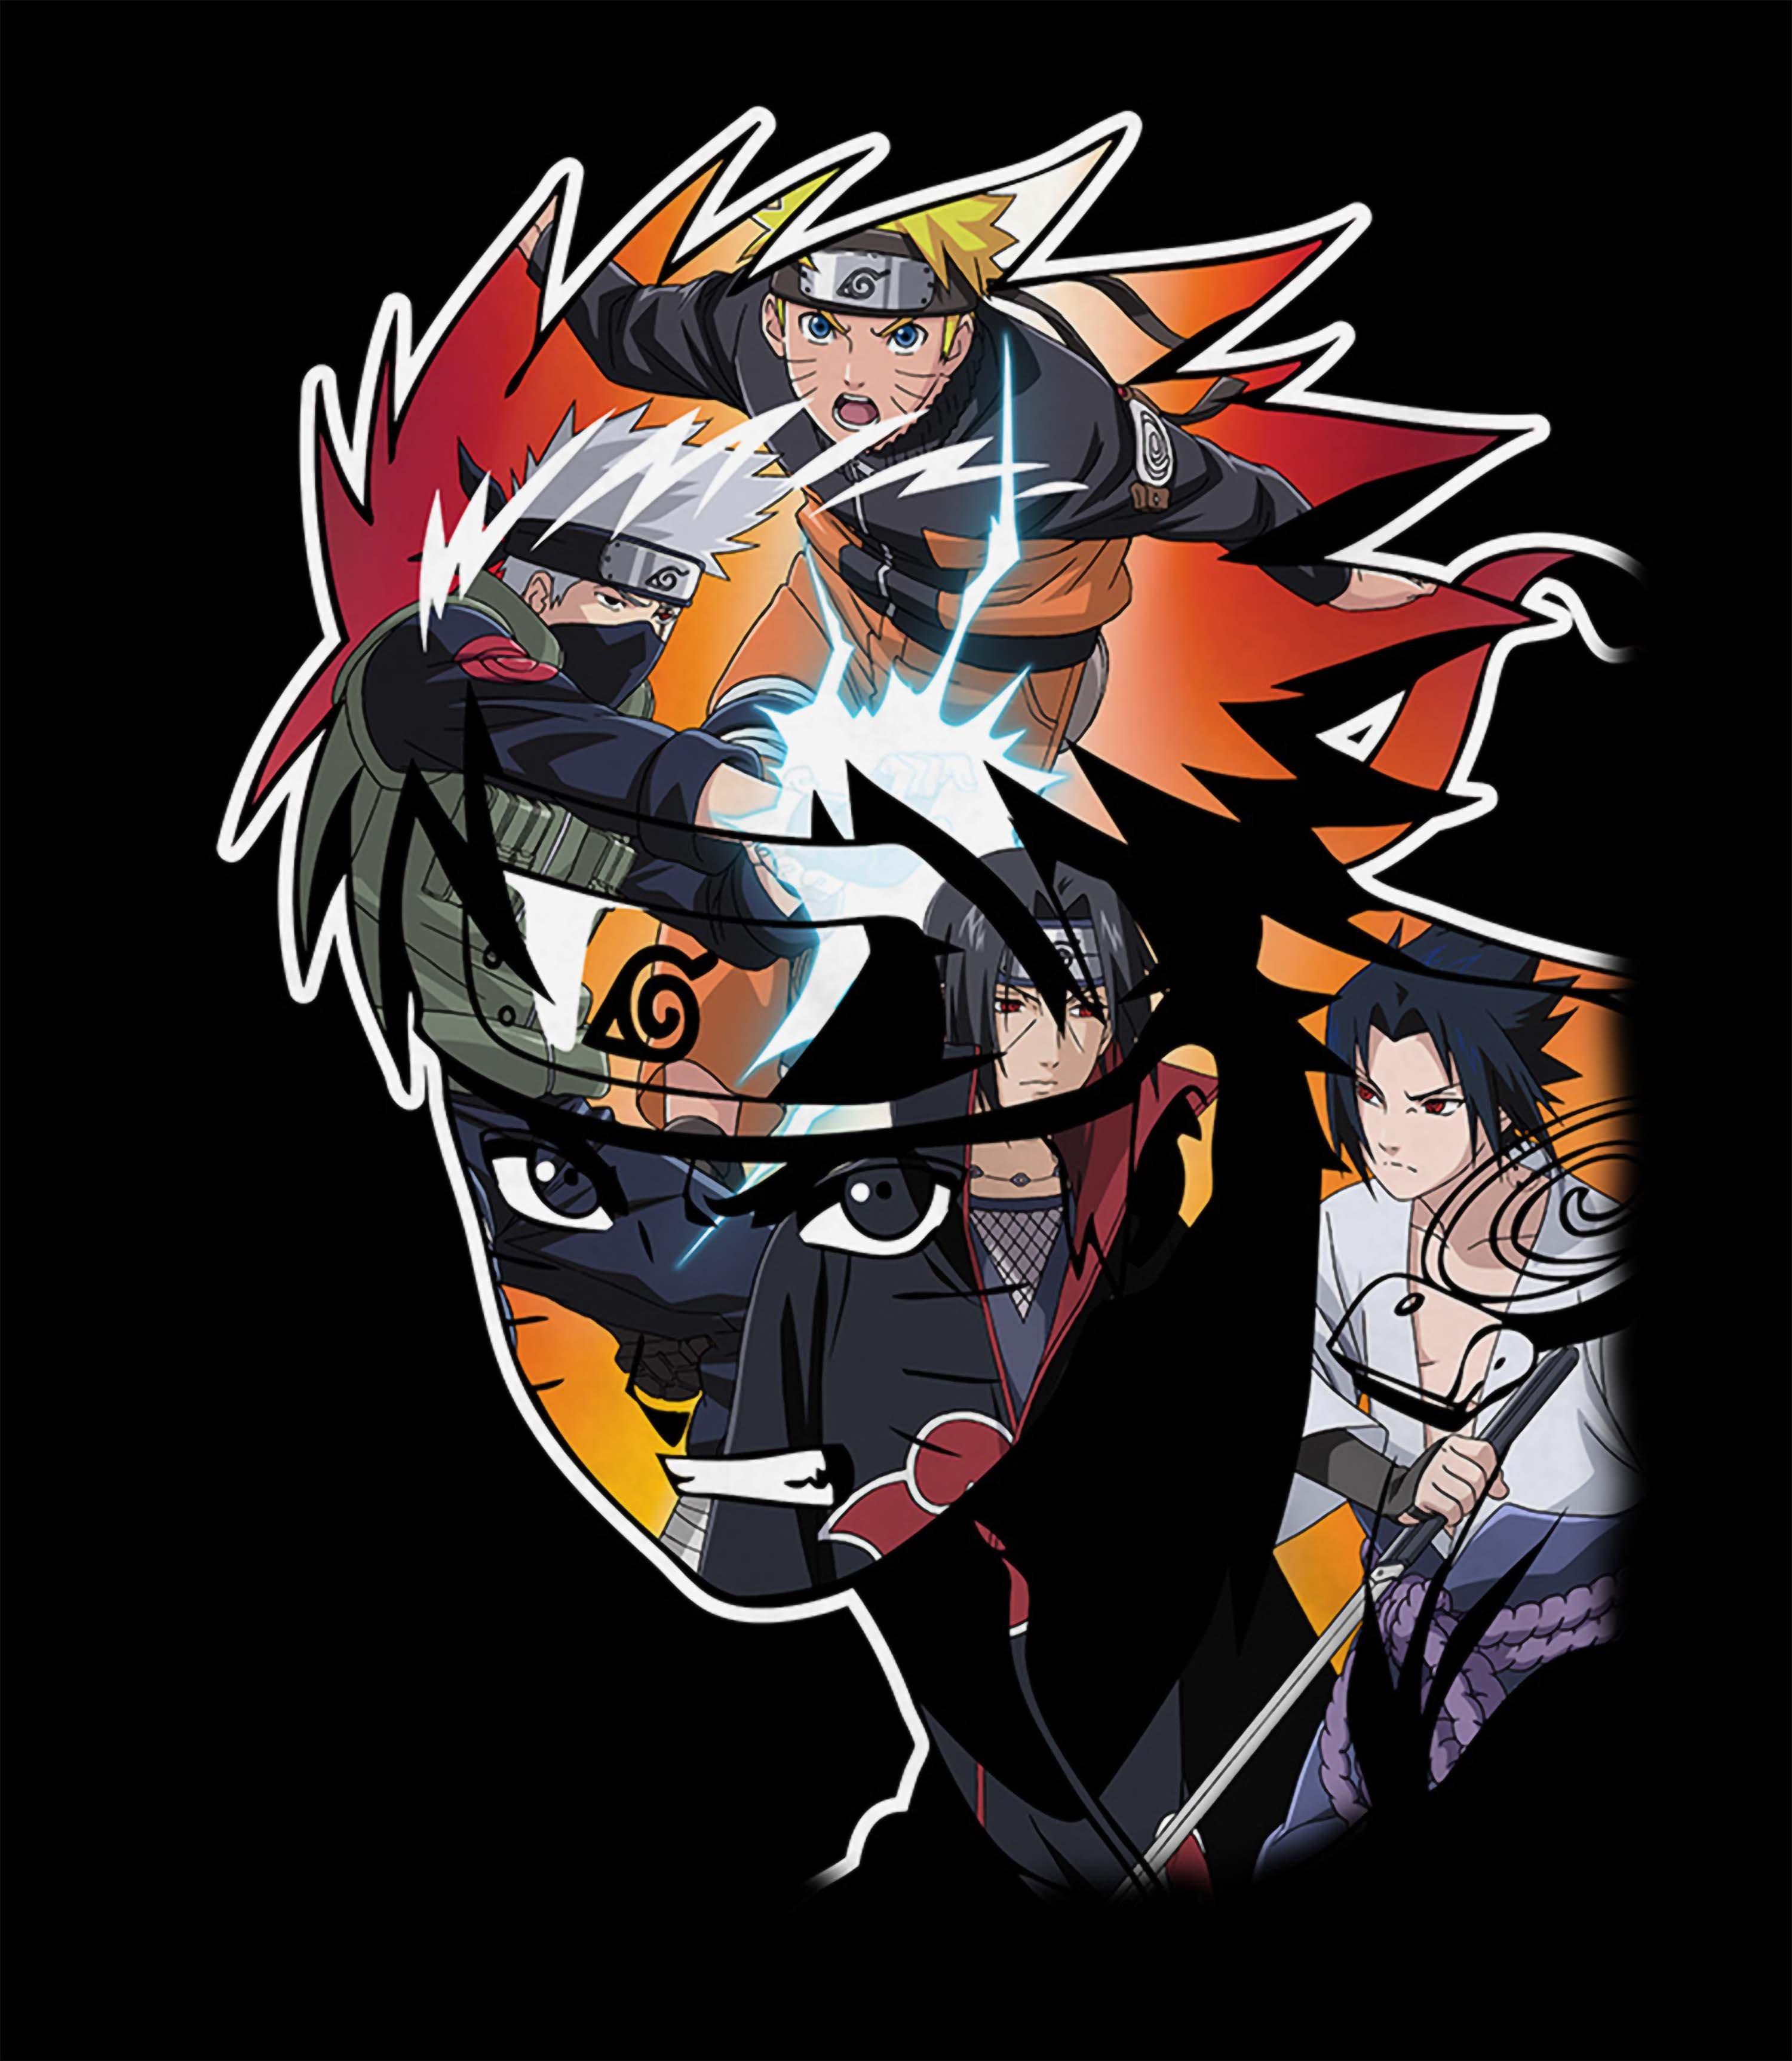 Naruto Characters Collage Unisex T-Shirt GameStop